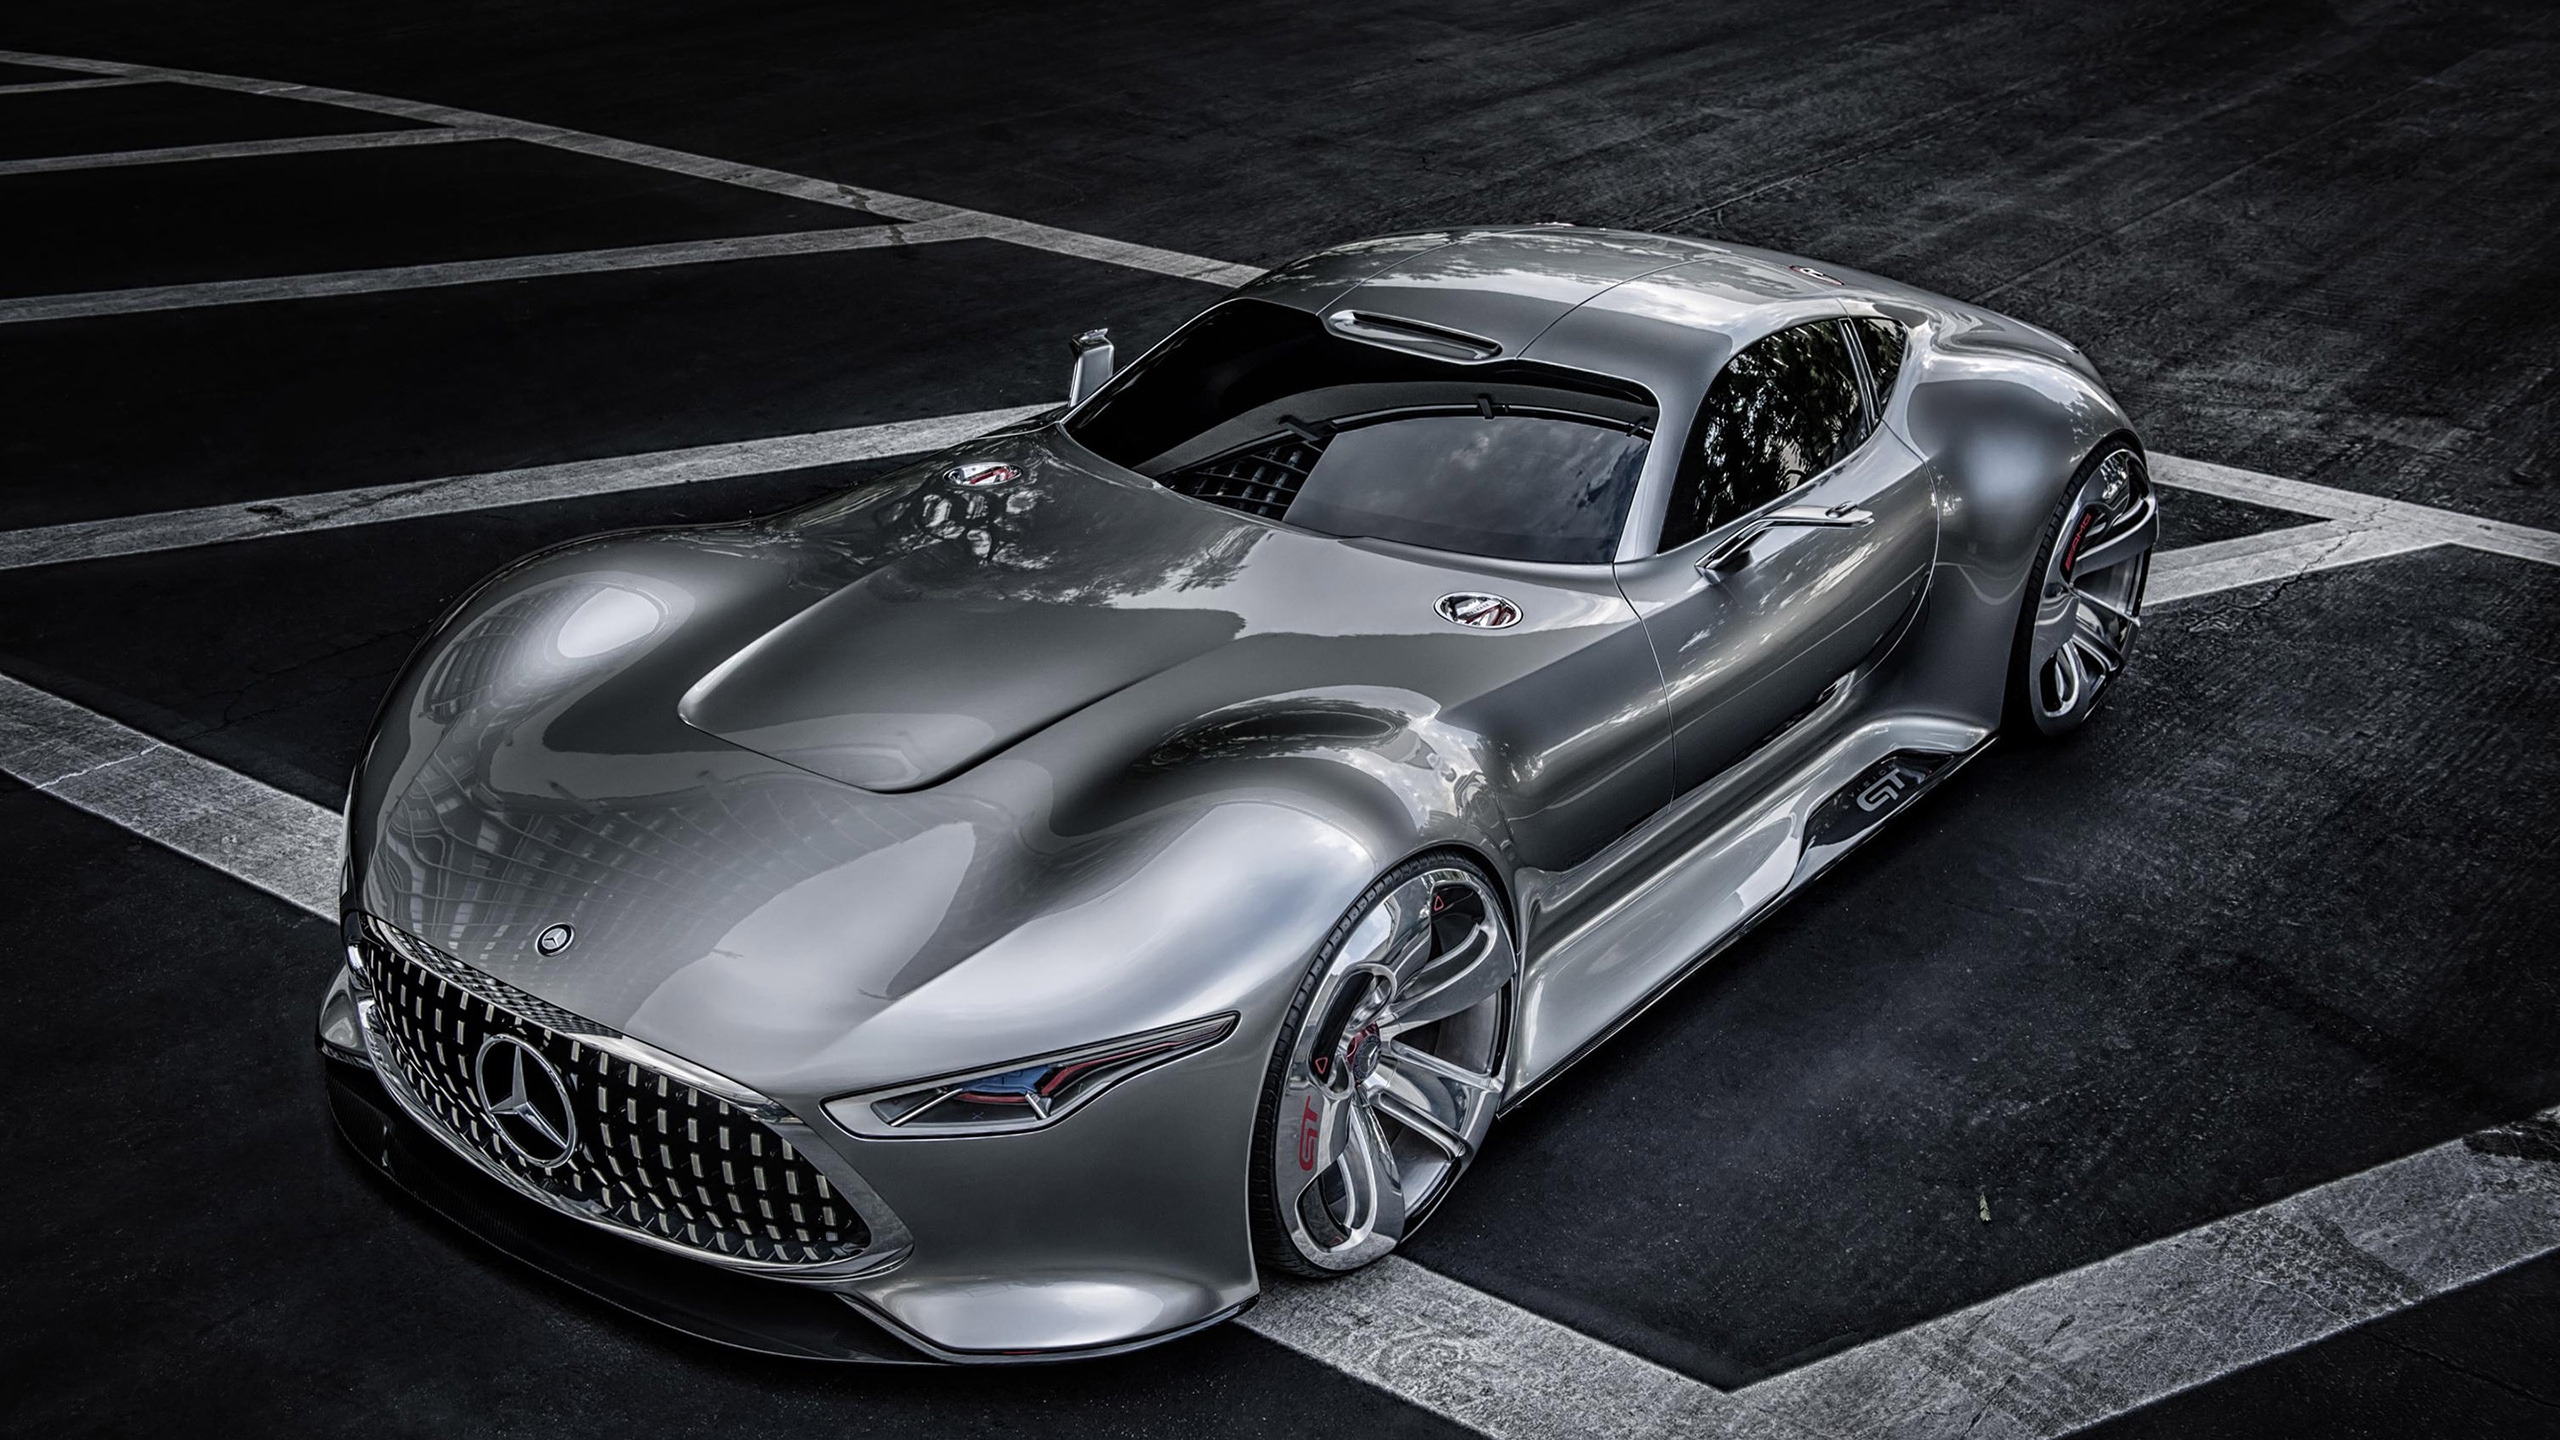 Mercedes Benz AMG Vision Gran Turismo for 2560x1440 HDTV resolution